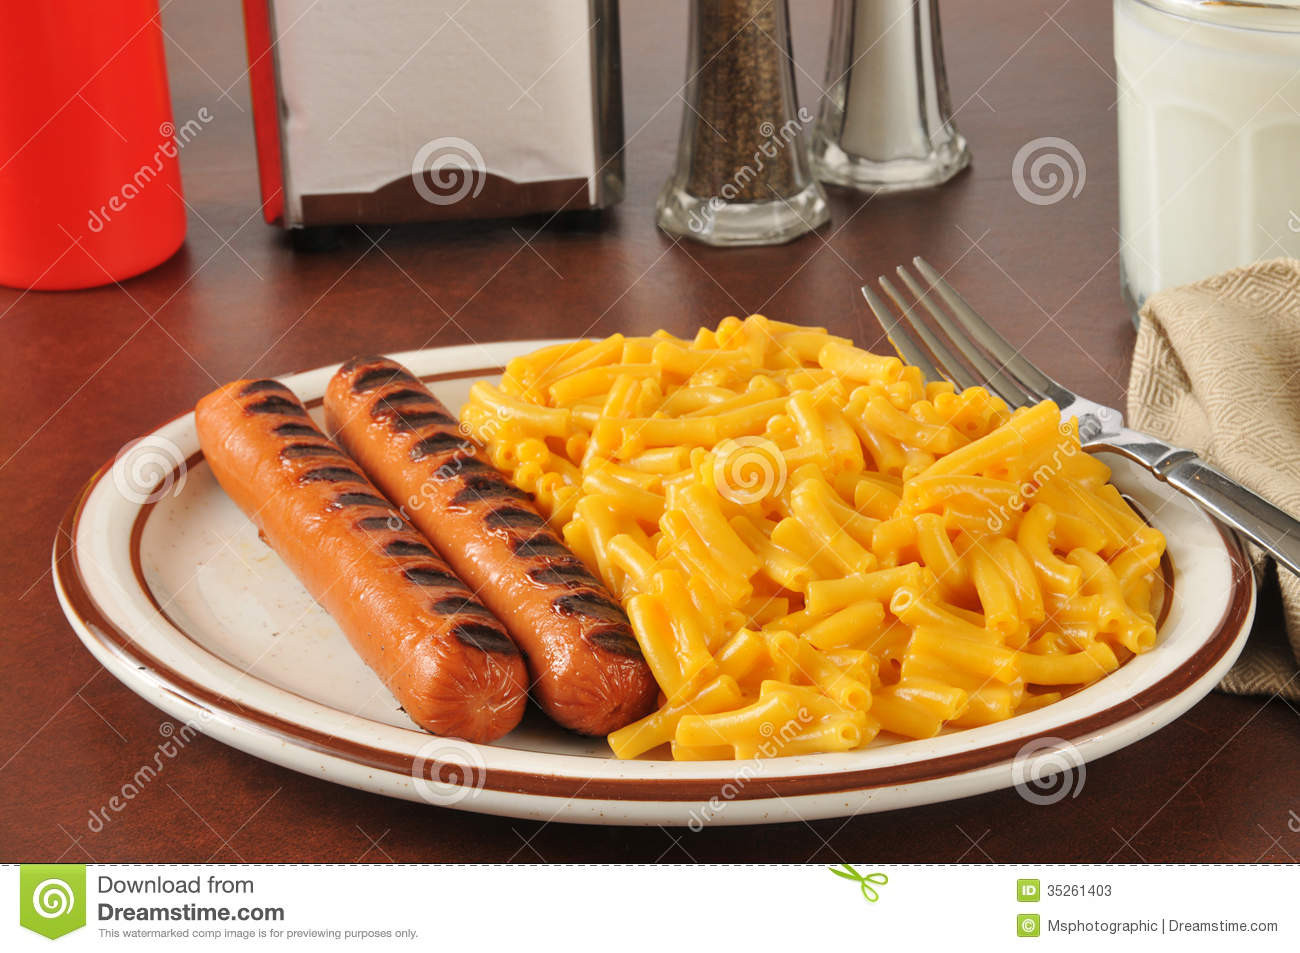 Hot Dogs And Mac And Cheese
 Hot Dogs And Macaroni And Cheese Stock Image Image of